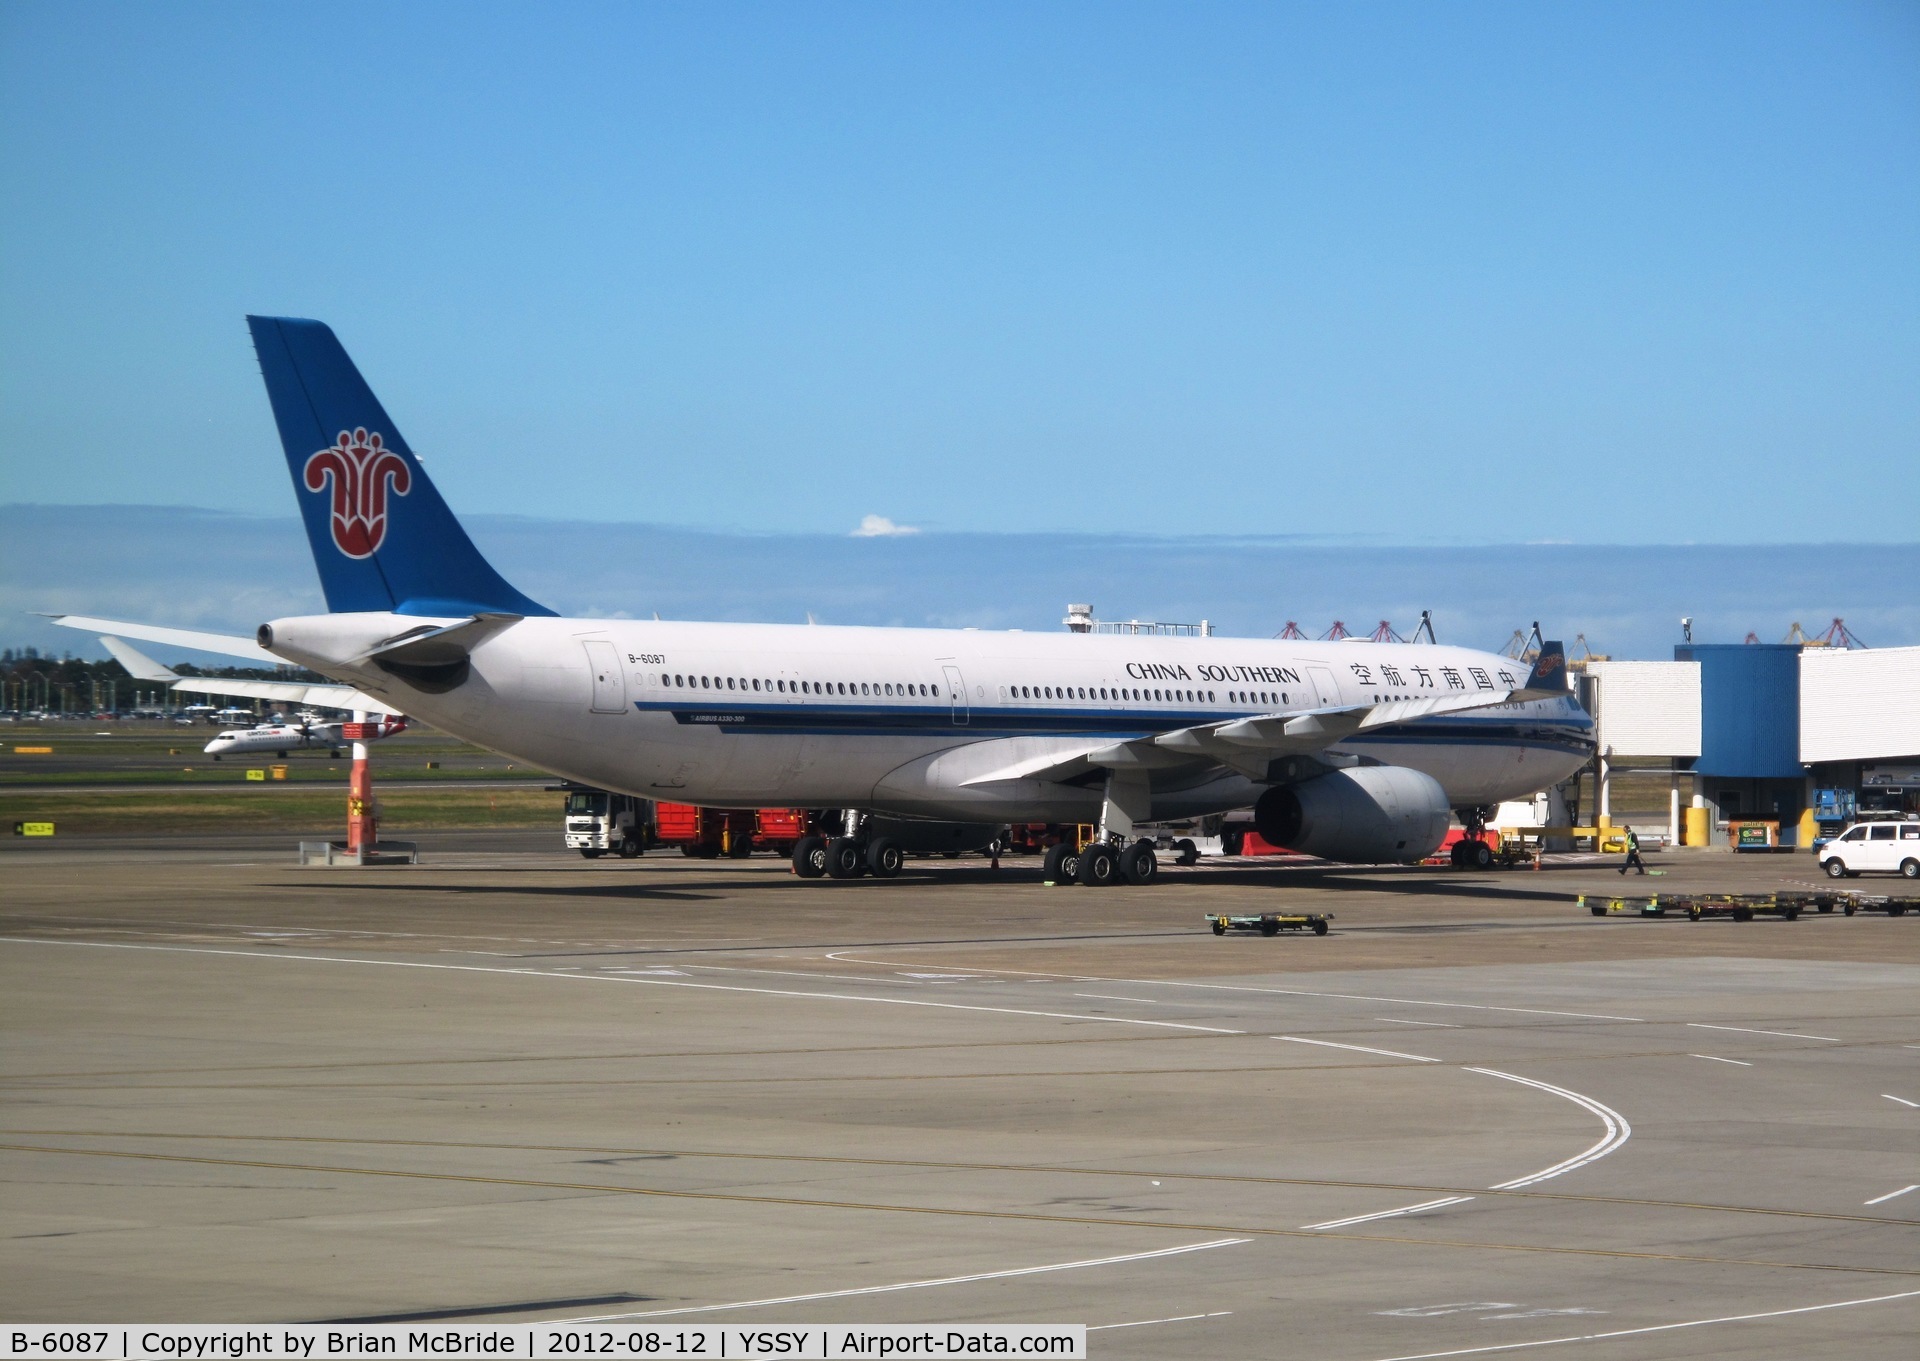 B-6087, 2007 Airbus A330-343E C/N 889, China Southern Airlines. A330-343X. B-6087 cn 889. Sydney - Kingsford Smith International (Mascot) (SYD YSSY). Image © Brian McBride. 13 August 2012